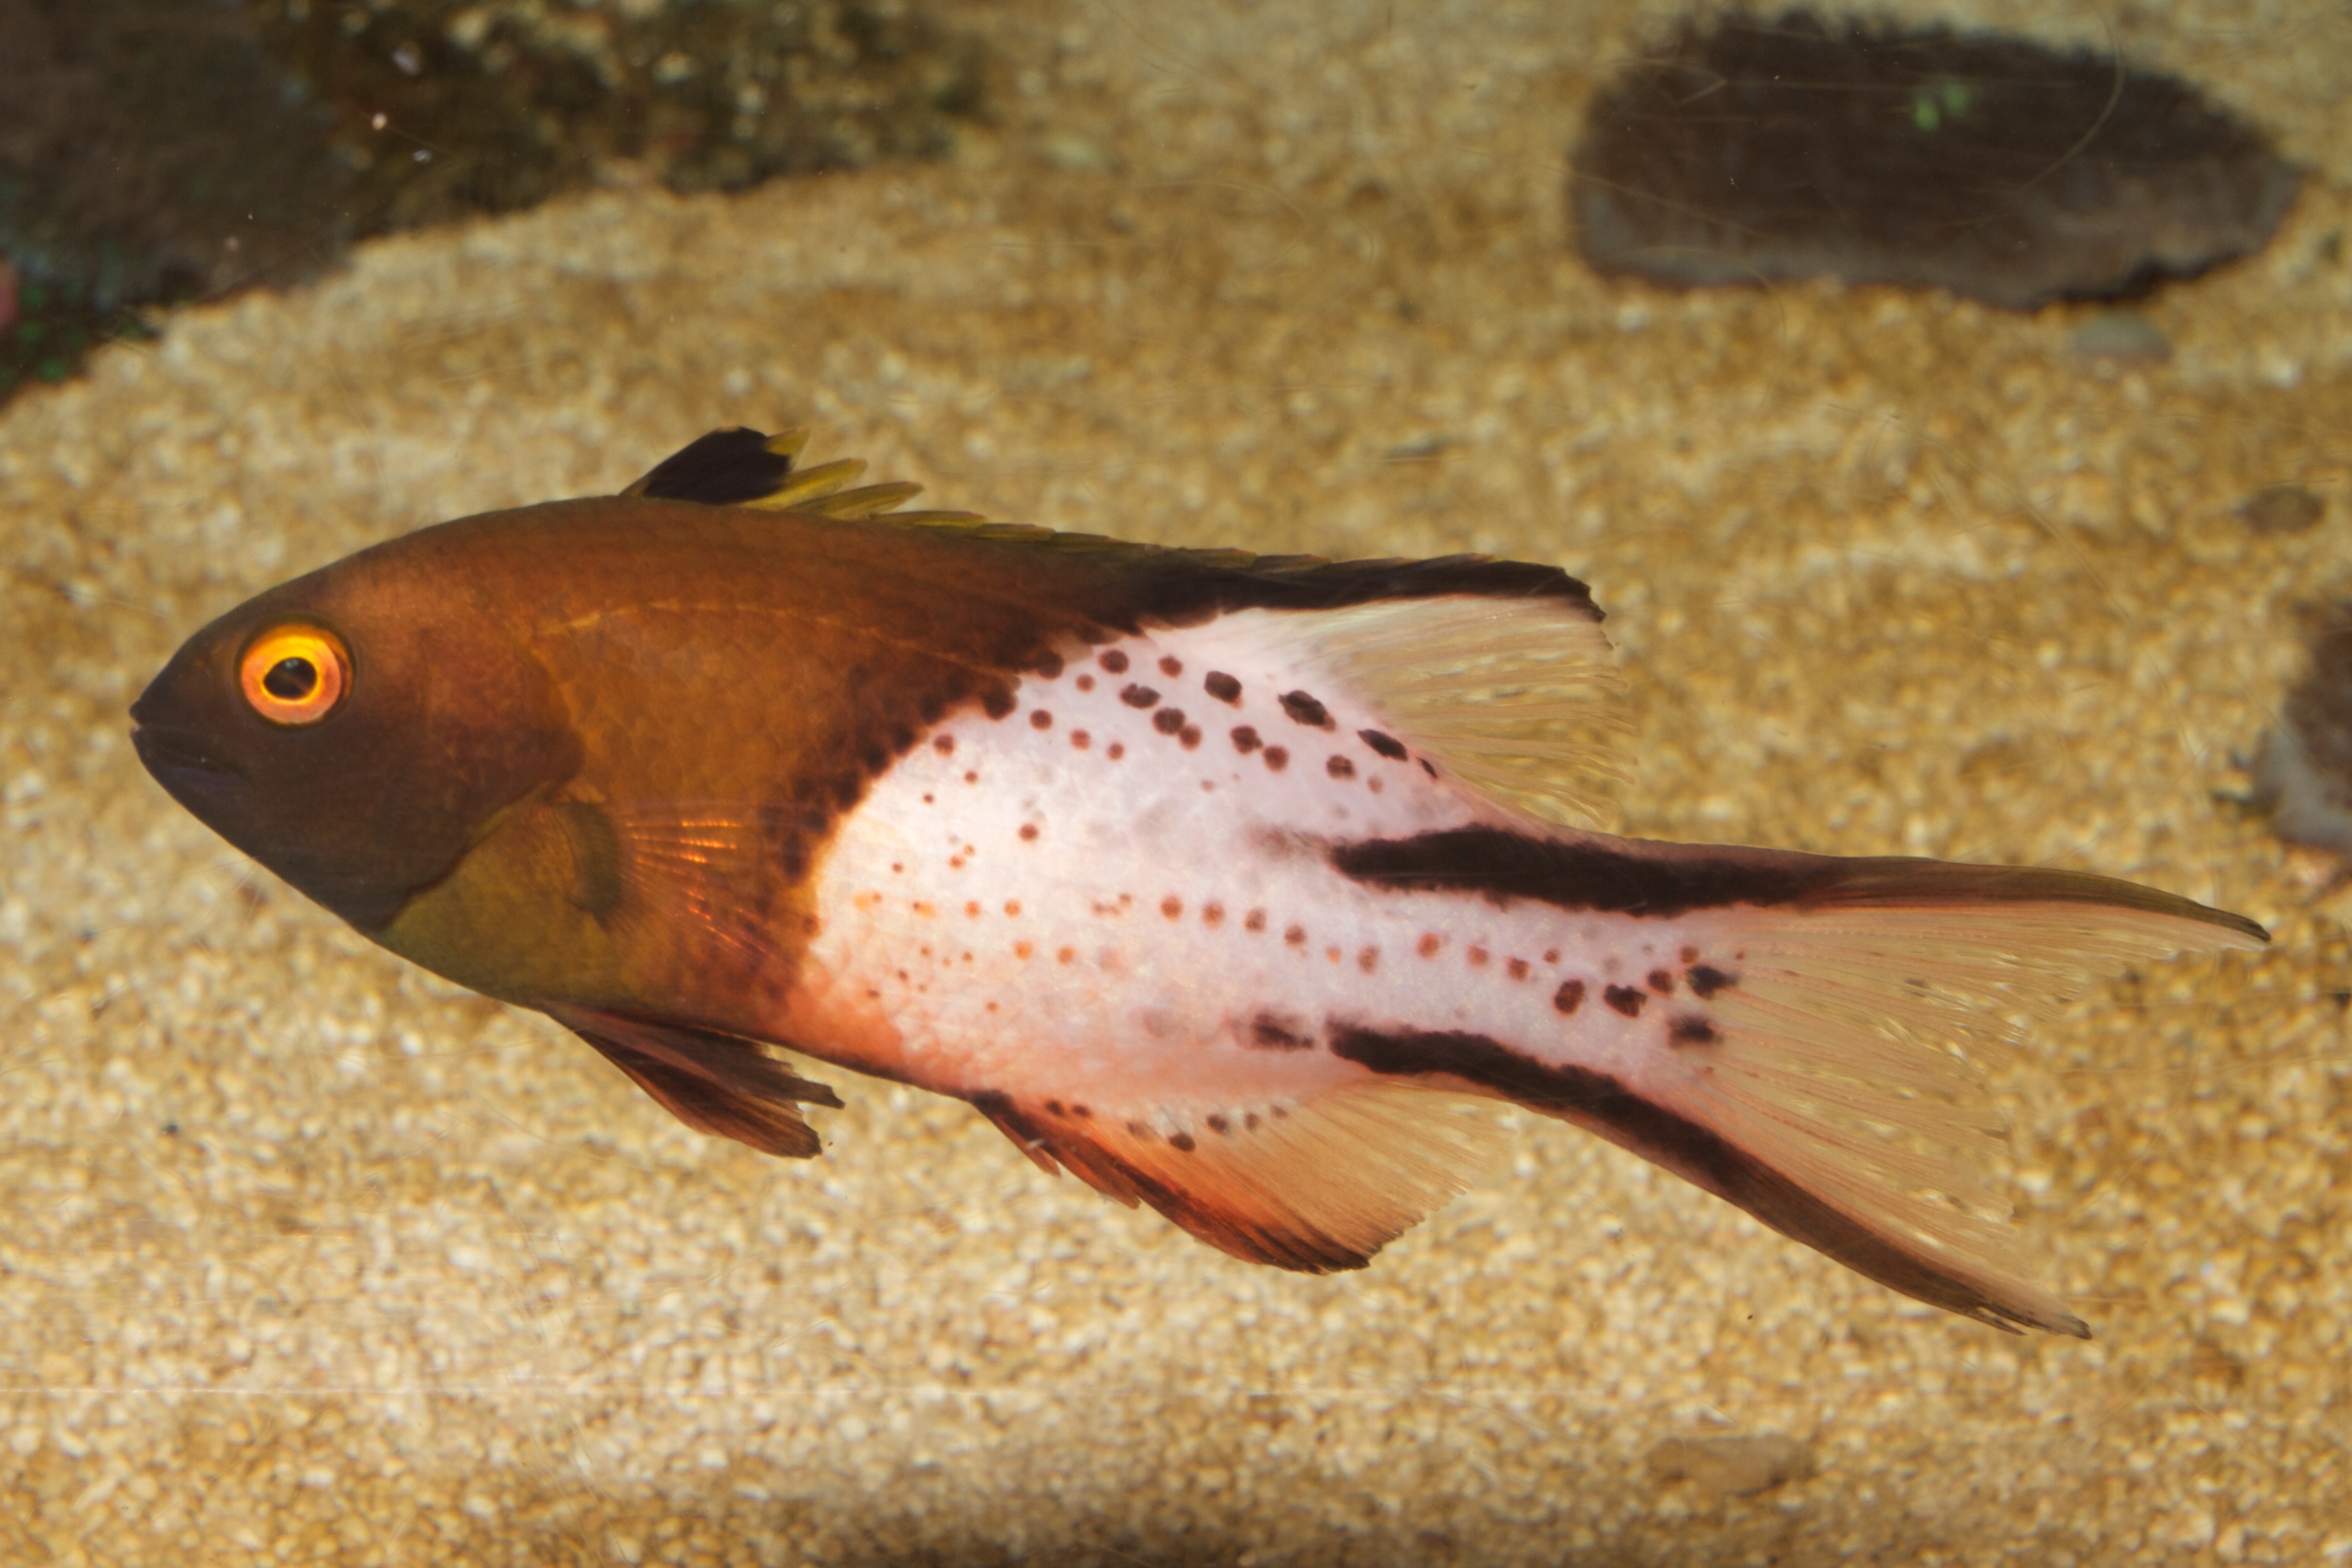 Image of Lyre-tail hogfish